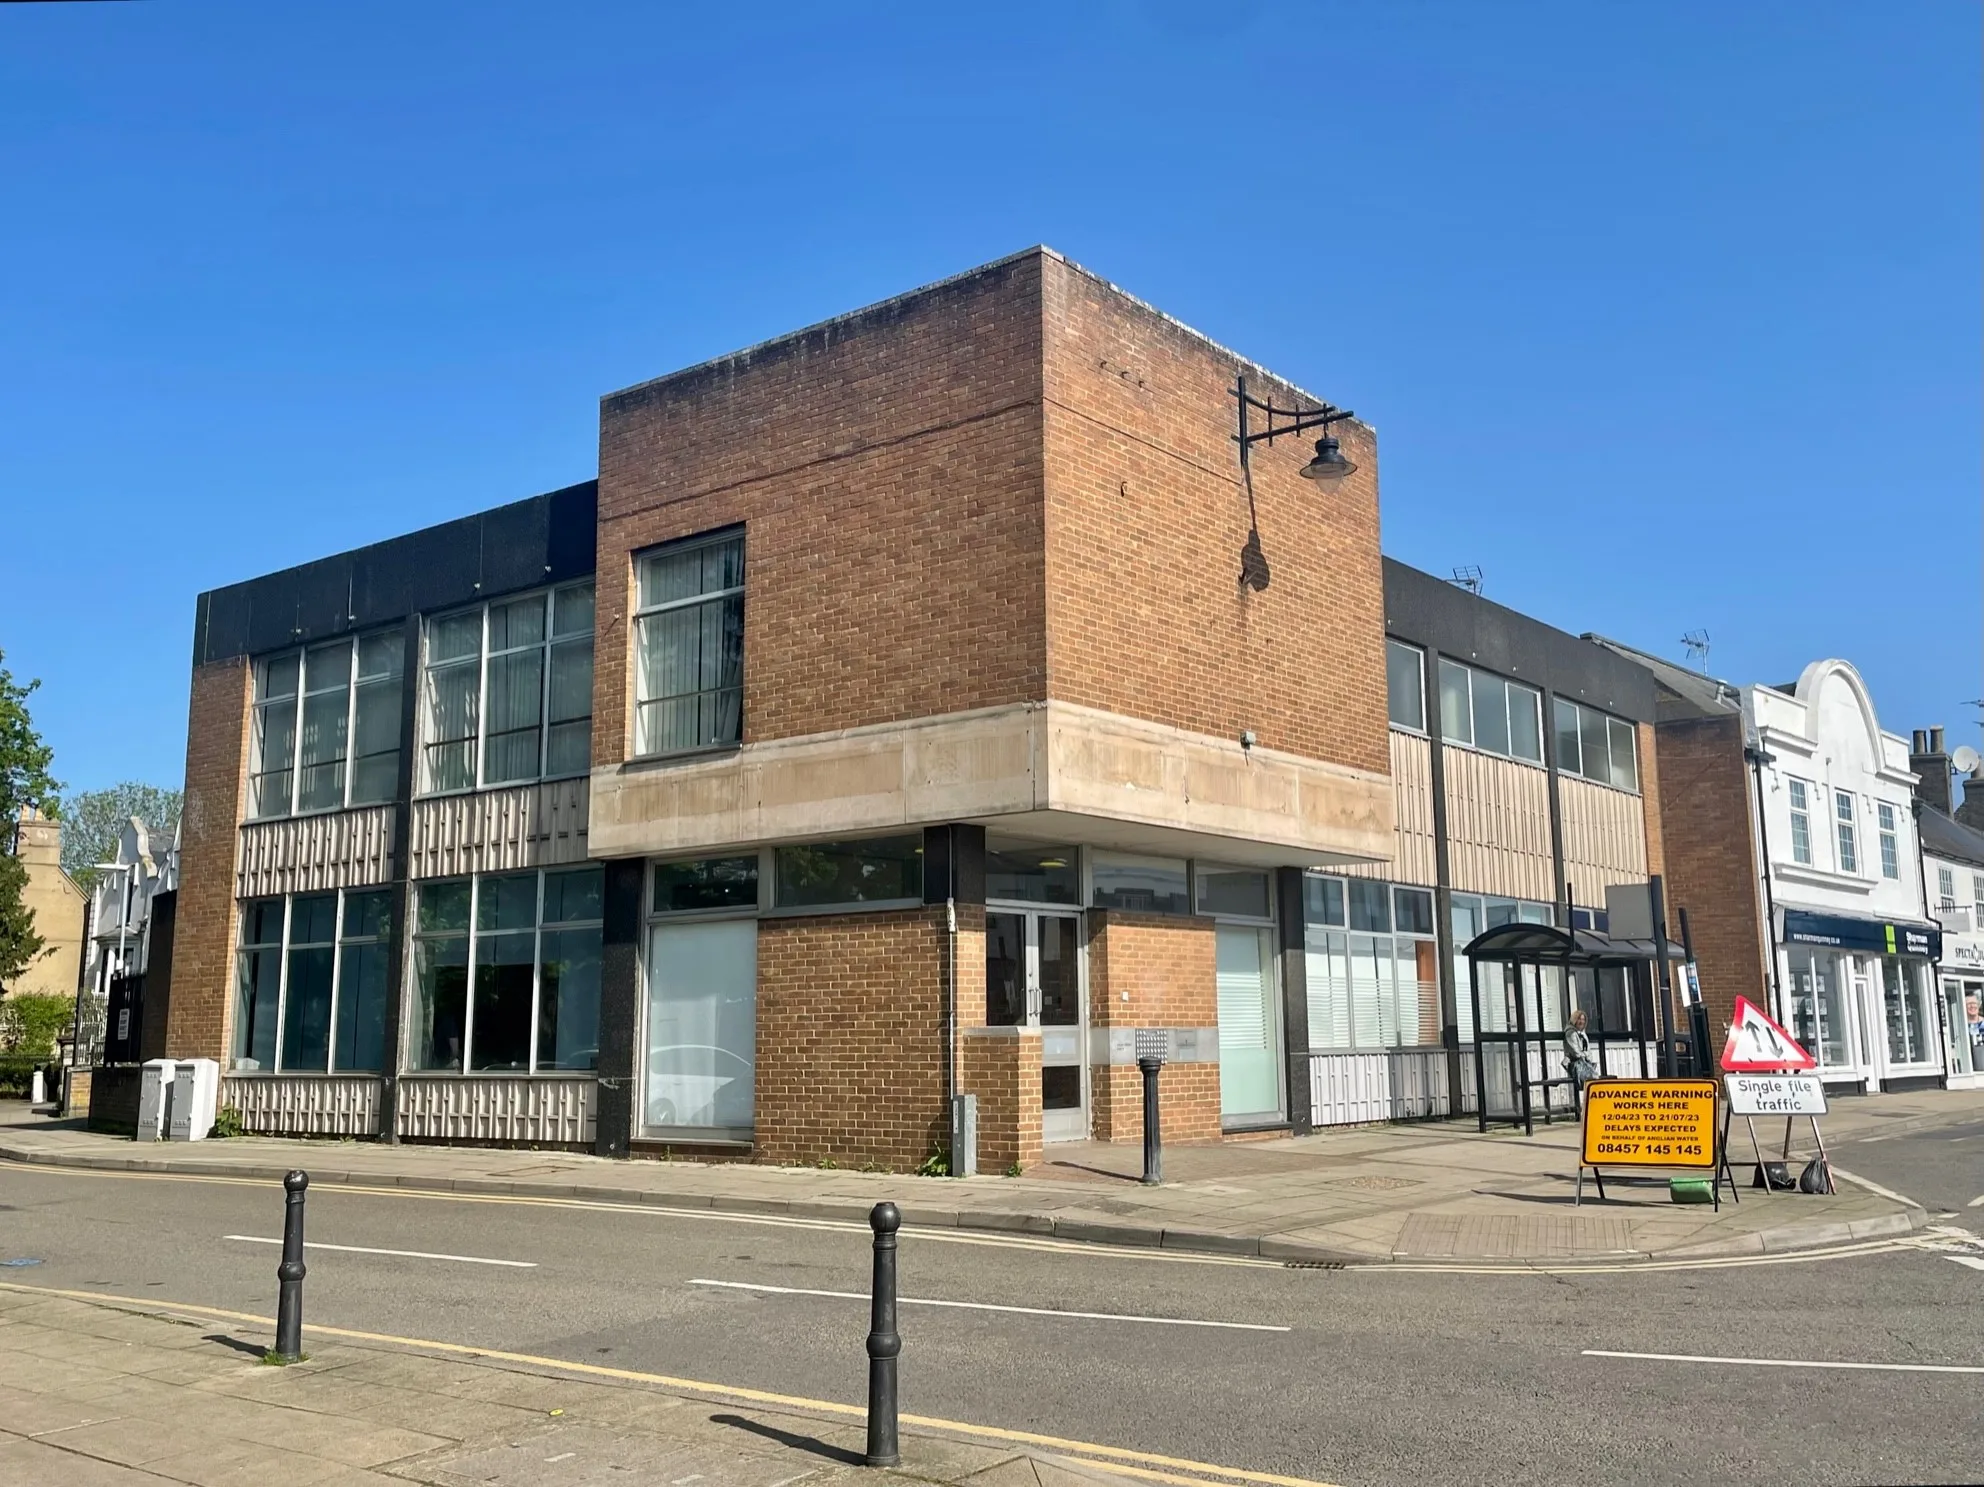 The money to buy the former Barclays bank building in March has come from the £6.4million awarded to Fenland Council from the Government’s Future High Streets Fund in January 2021.